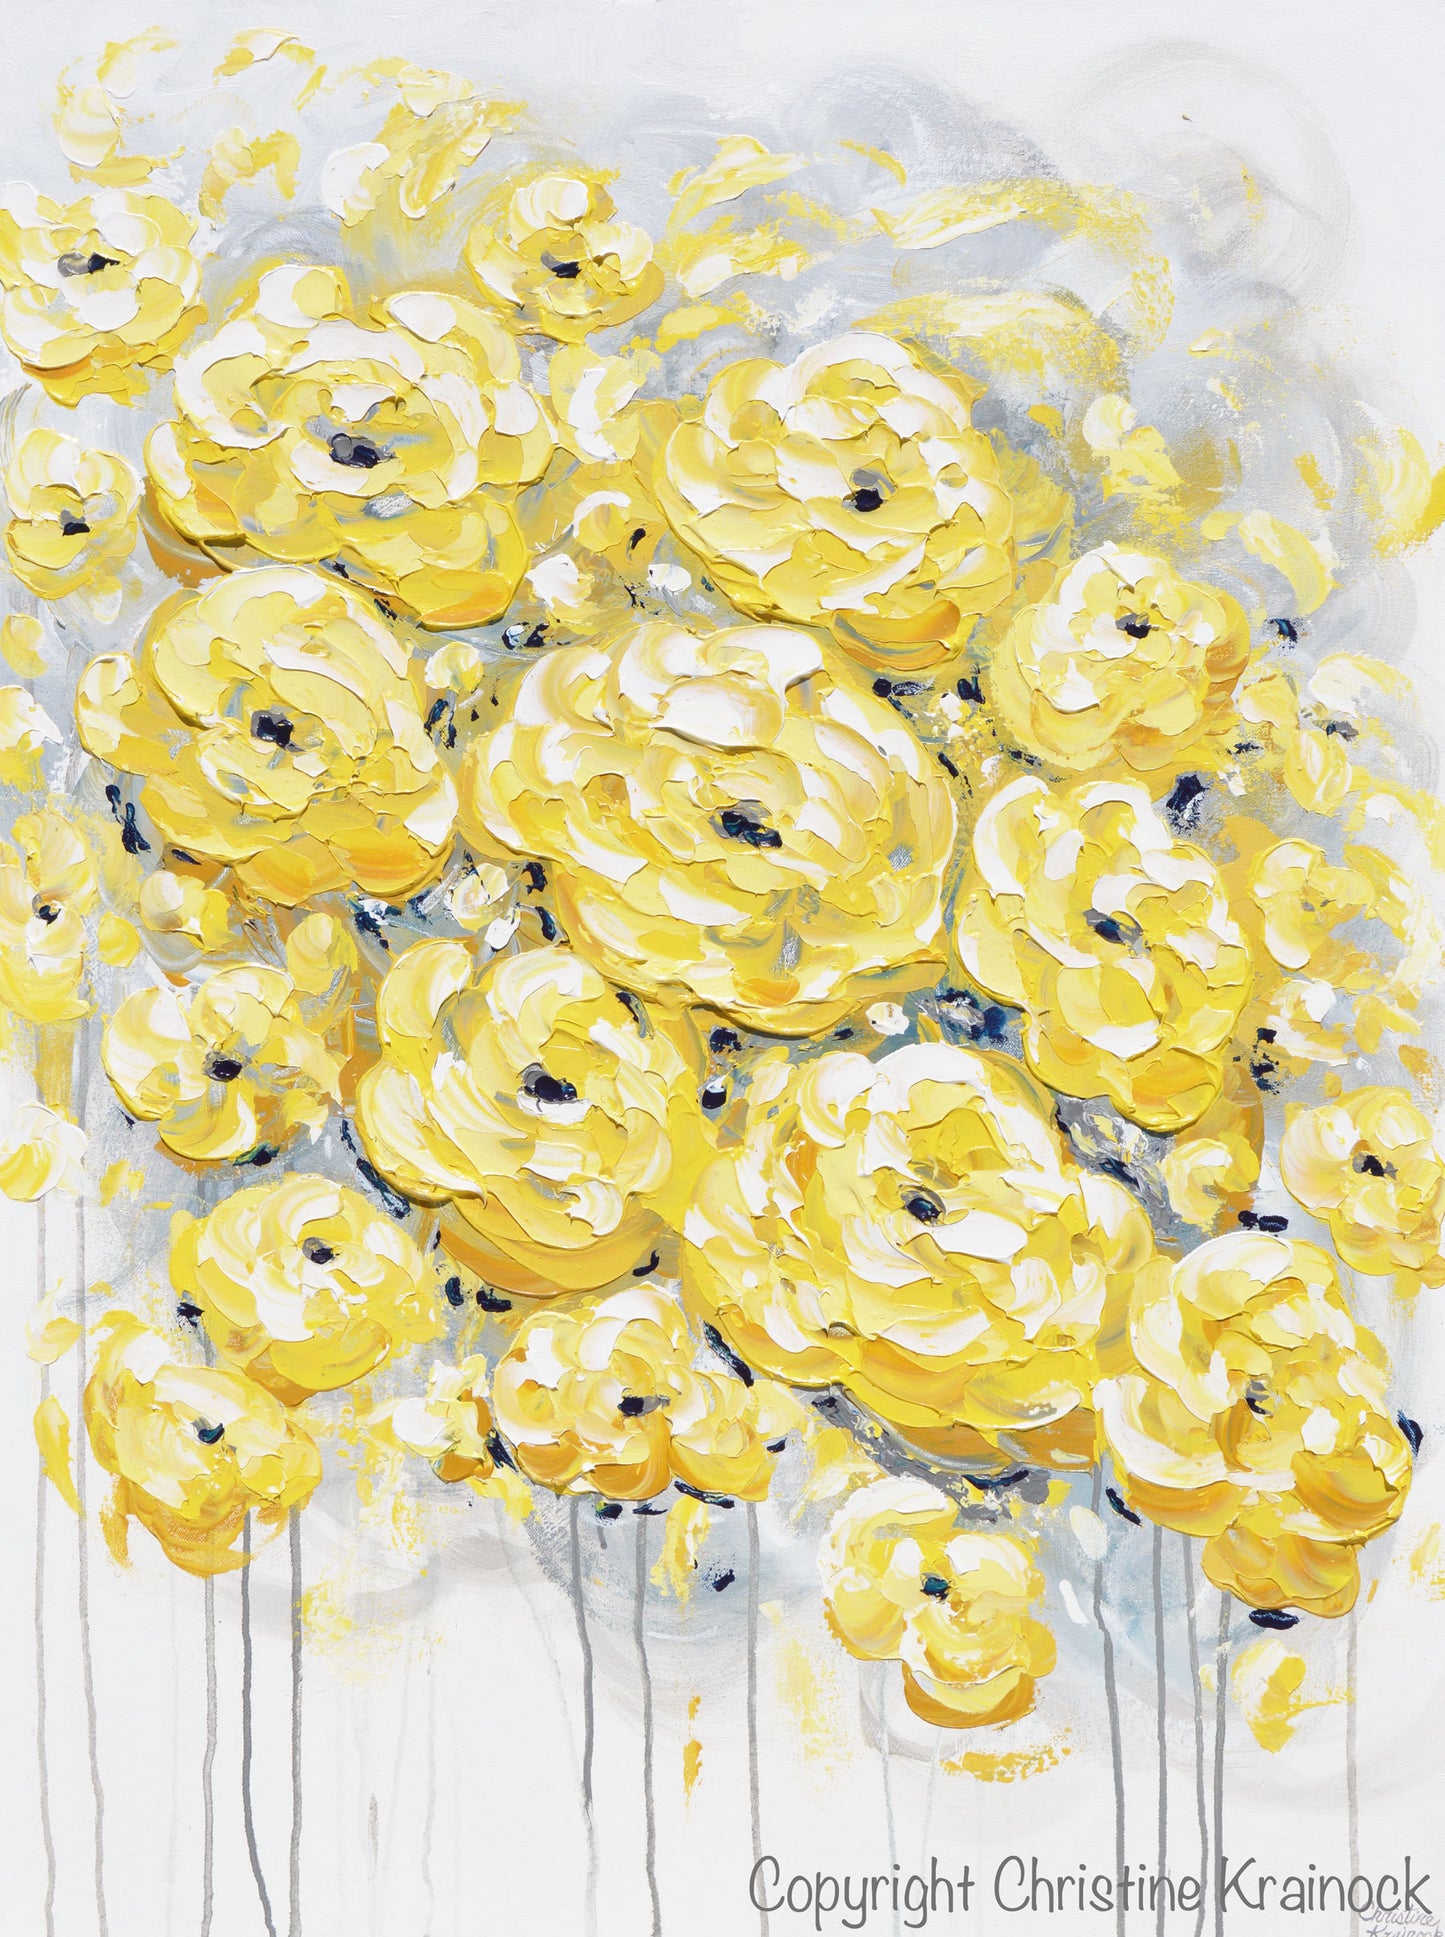 GICLEE PRINT Art Yellow Grey Gold Abstract Painting Poppy Flowers Floral Coastal Artwork Canvas Art Prints